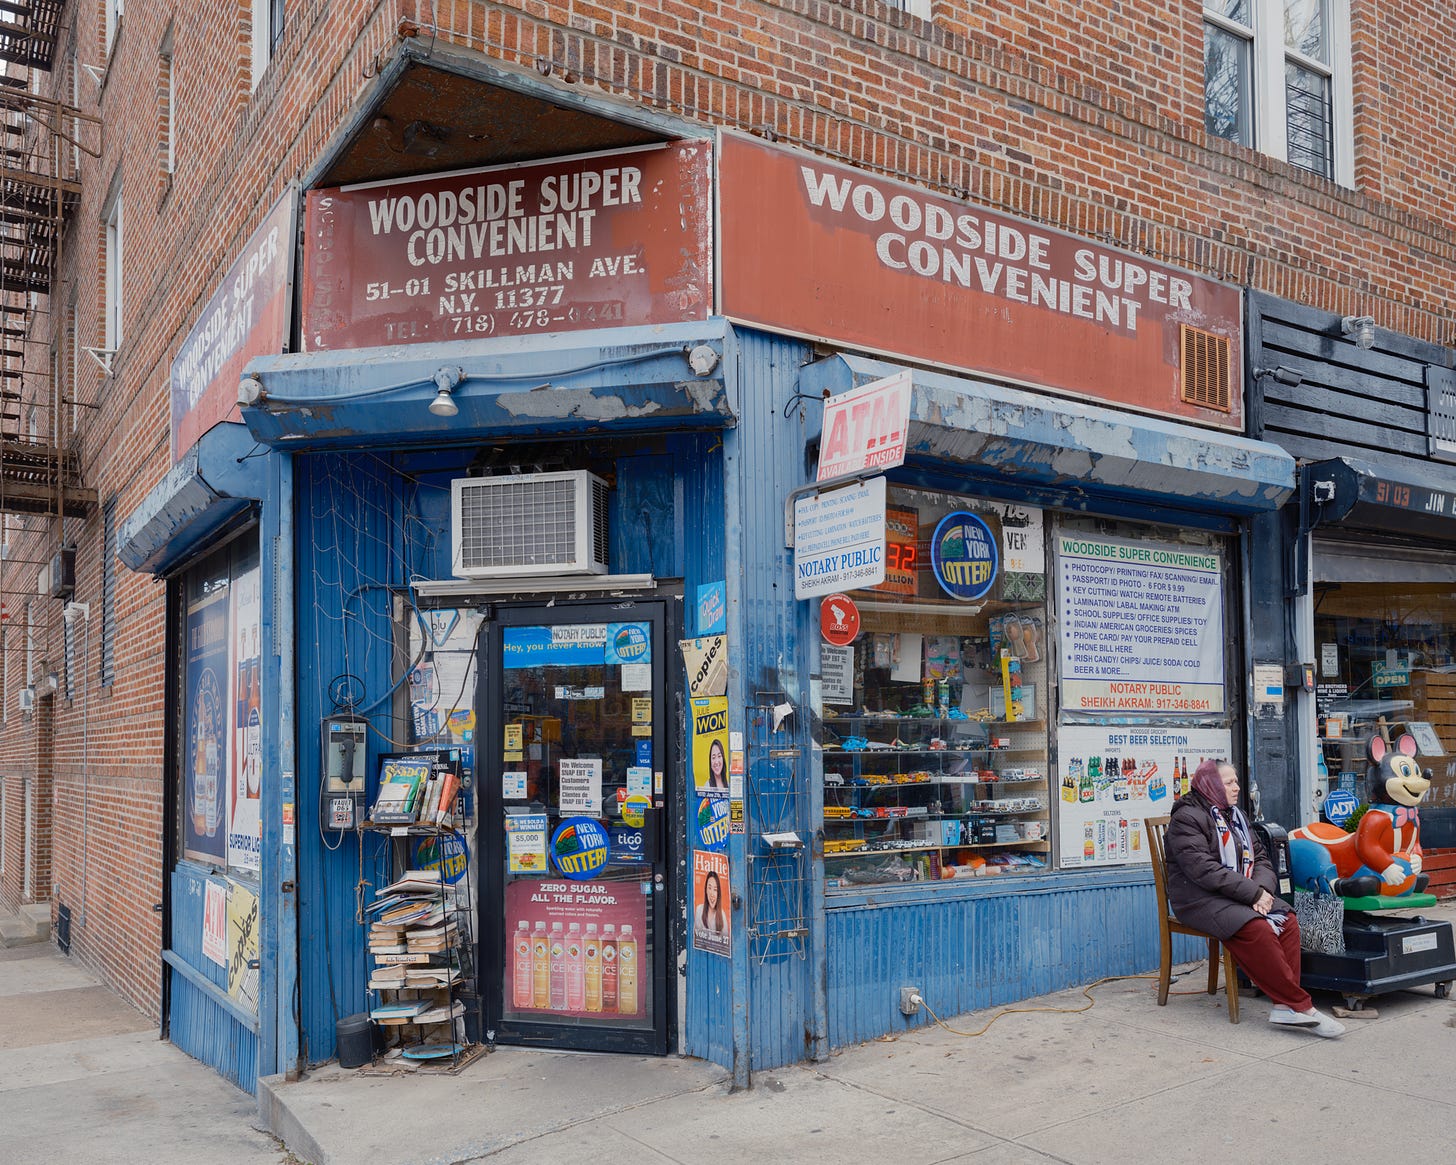 An older woman with a headscarf sits outside Woodside Super Convent store nest to a ride on mouse machine